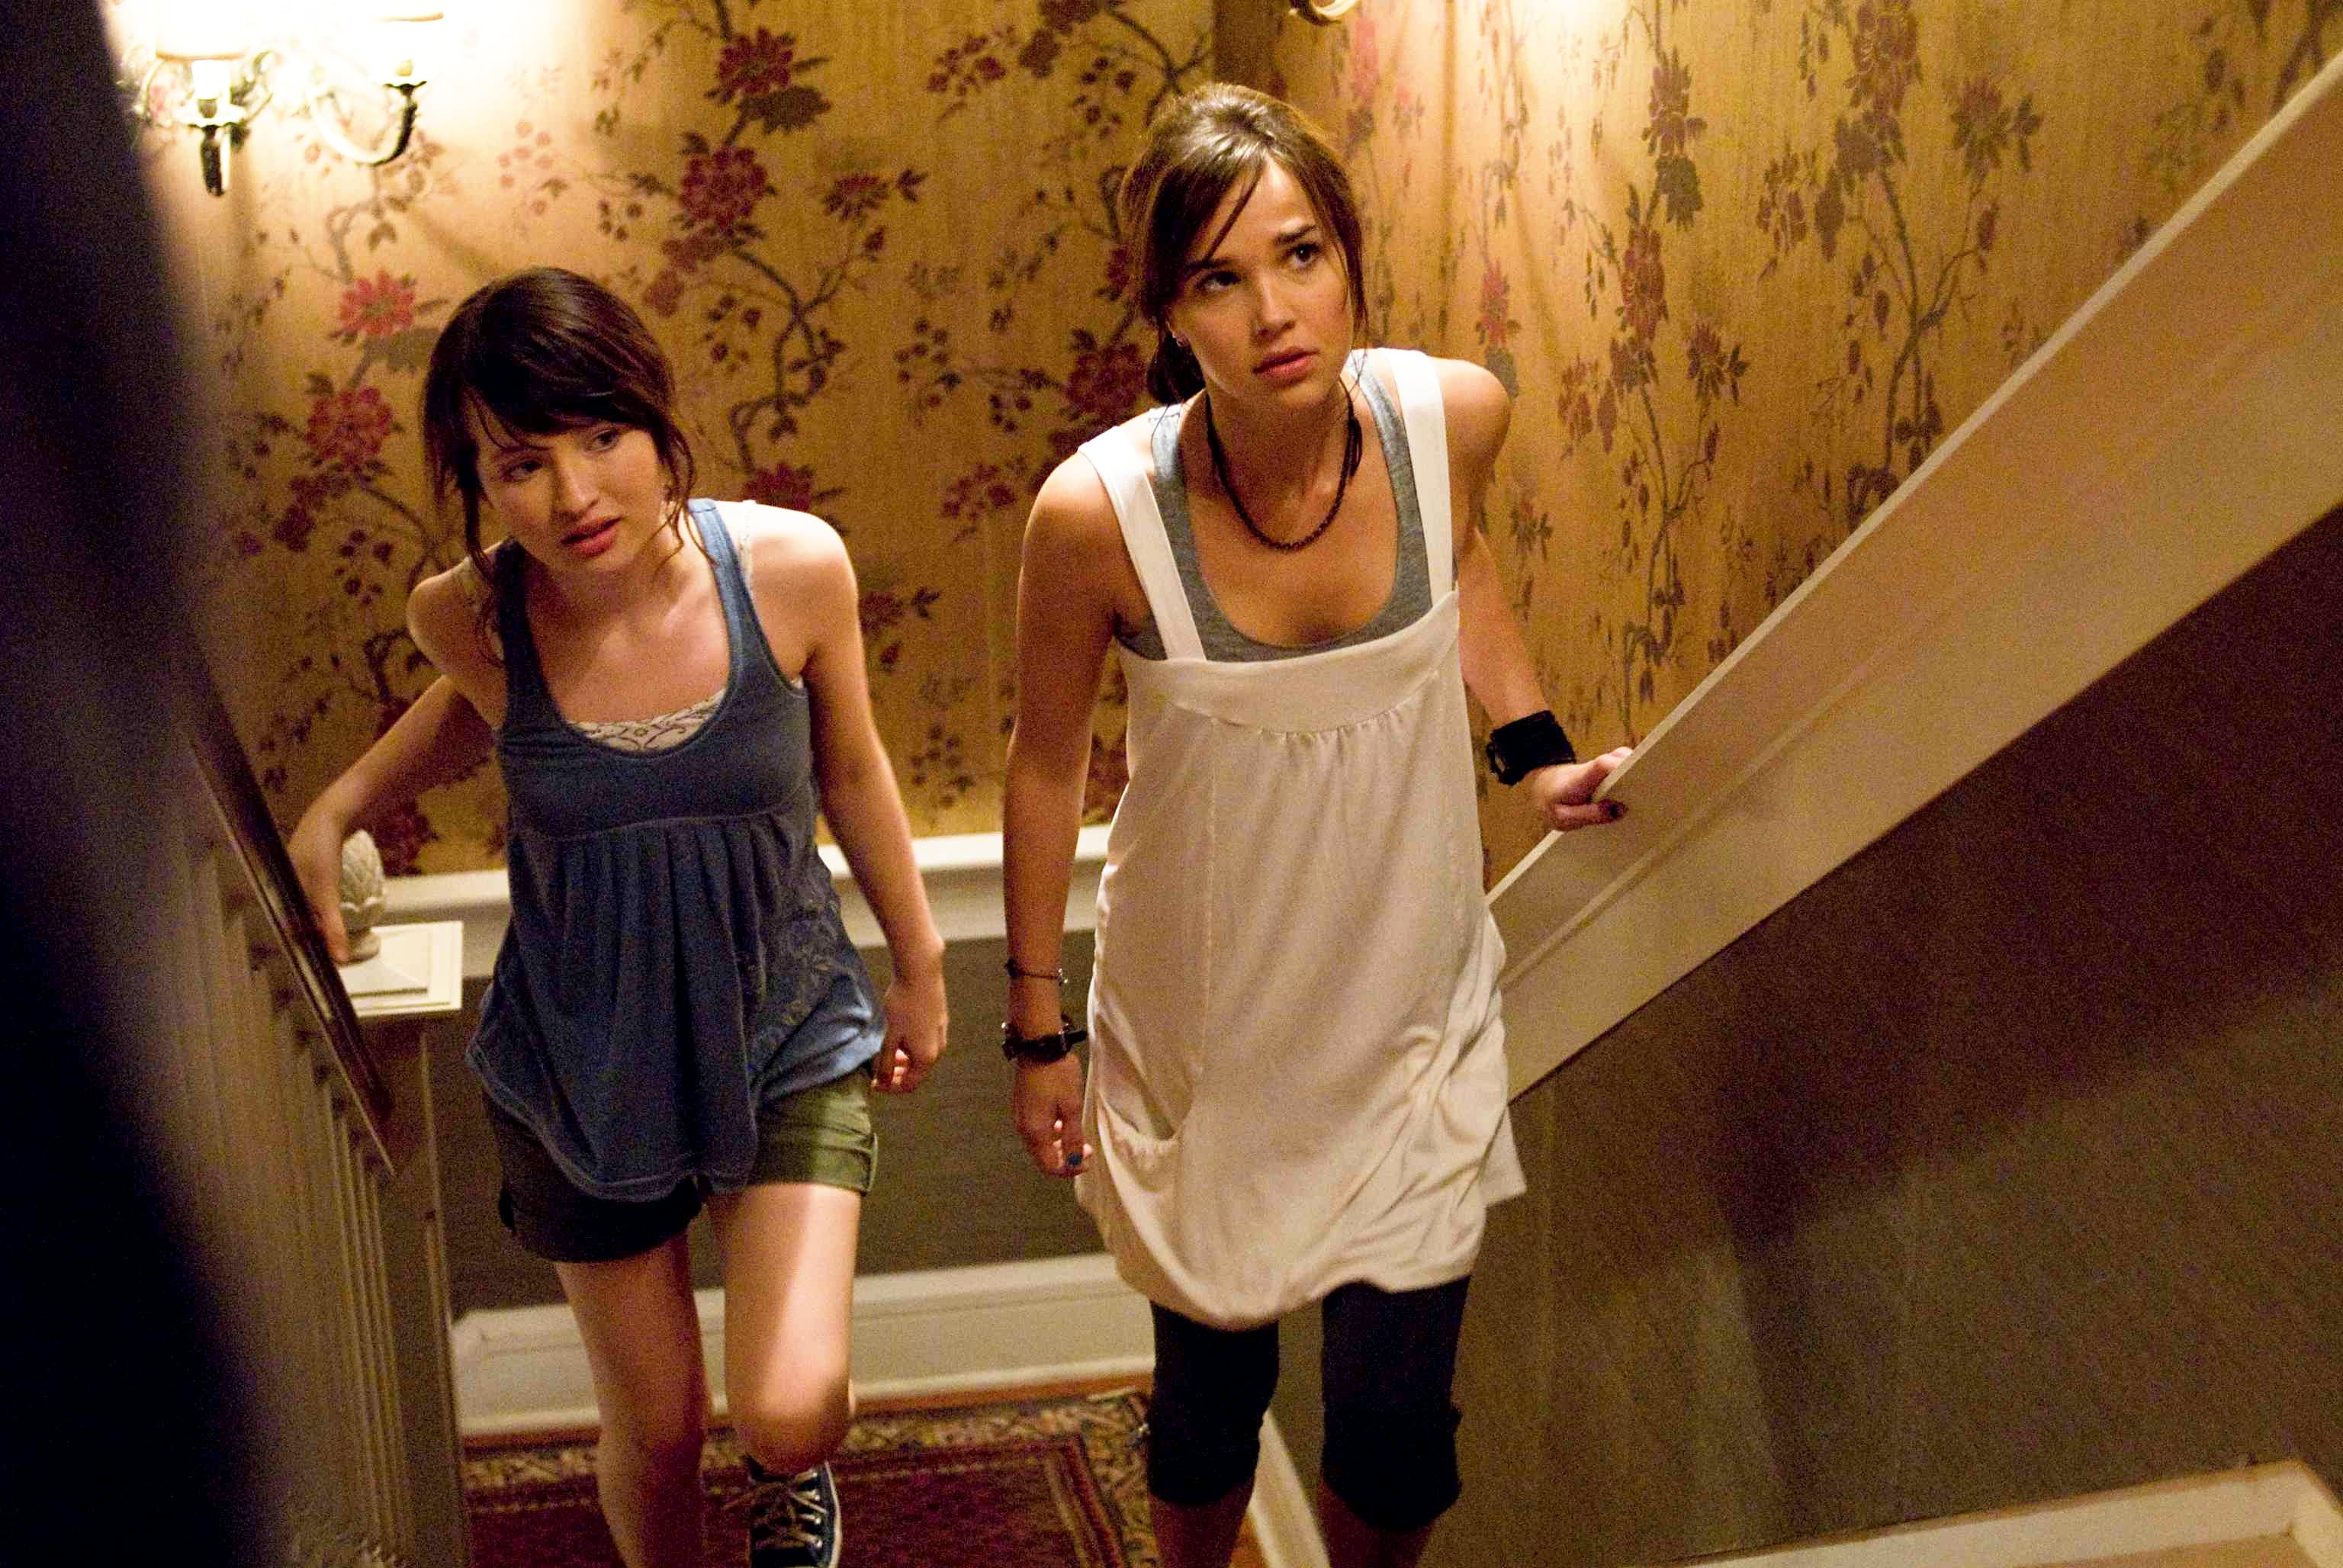 Emily Browning stars as Anna and Arielle Kebbel stars as Alex in DreamWorks' The Uninvited (2009). Photo credit by Kimberley French.